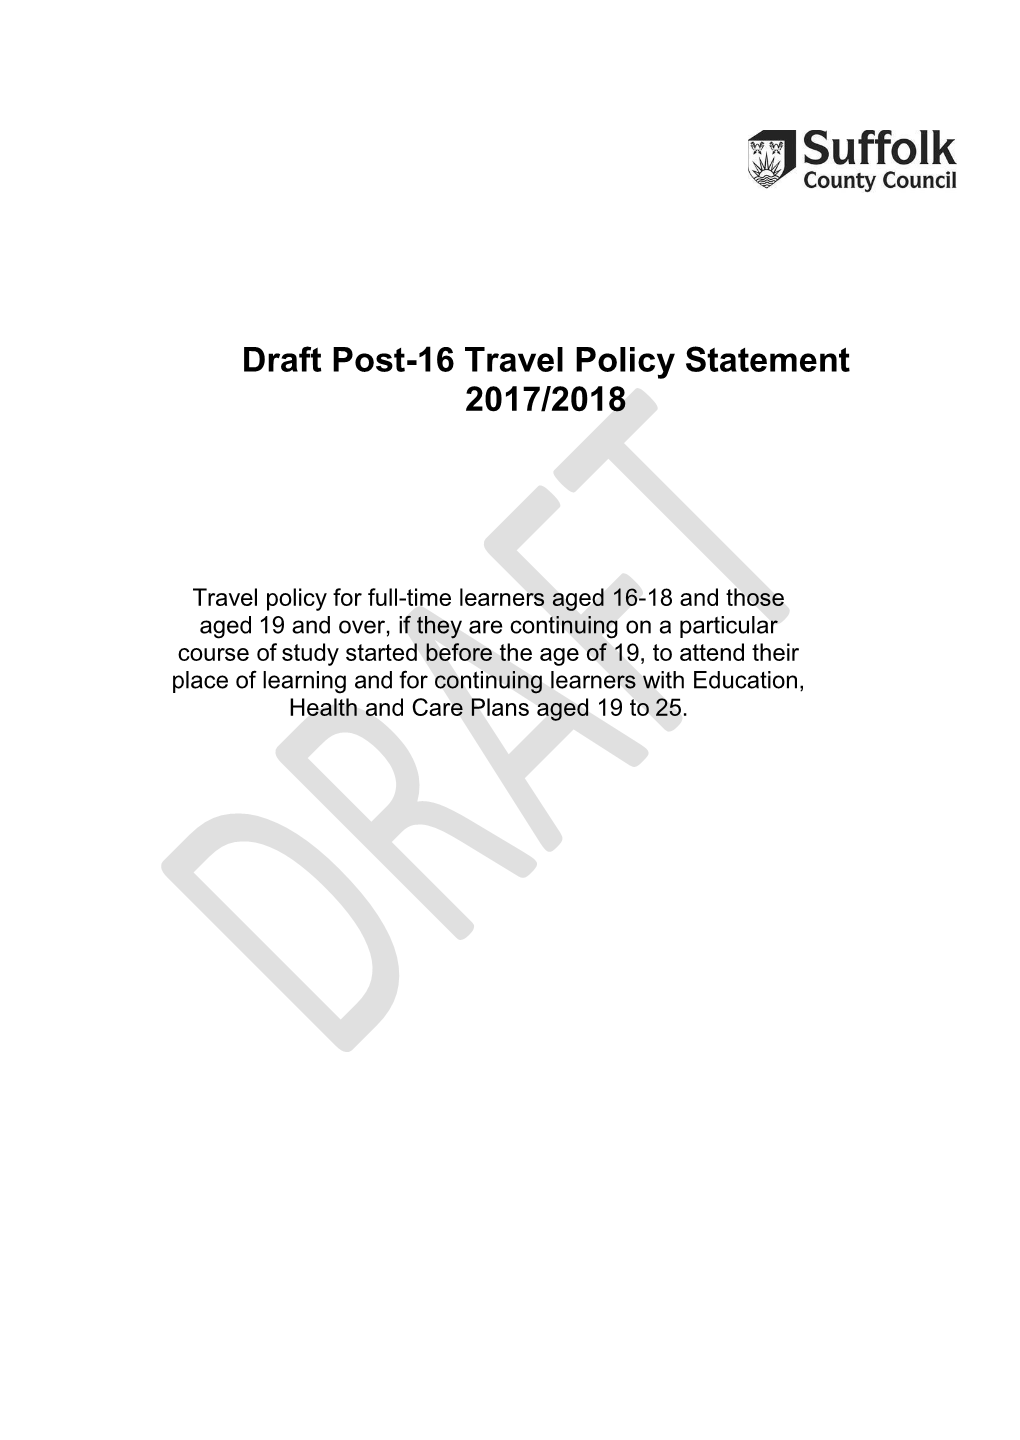 Draft Post-16 Travel Policy Statement 2017/2018